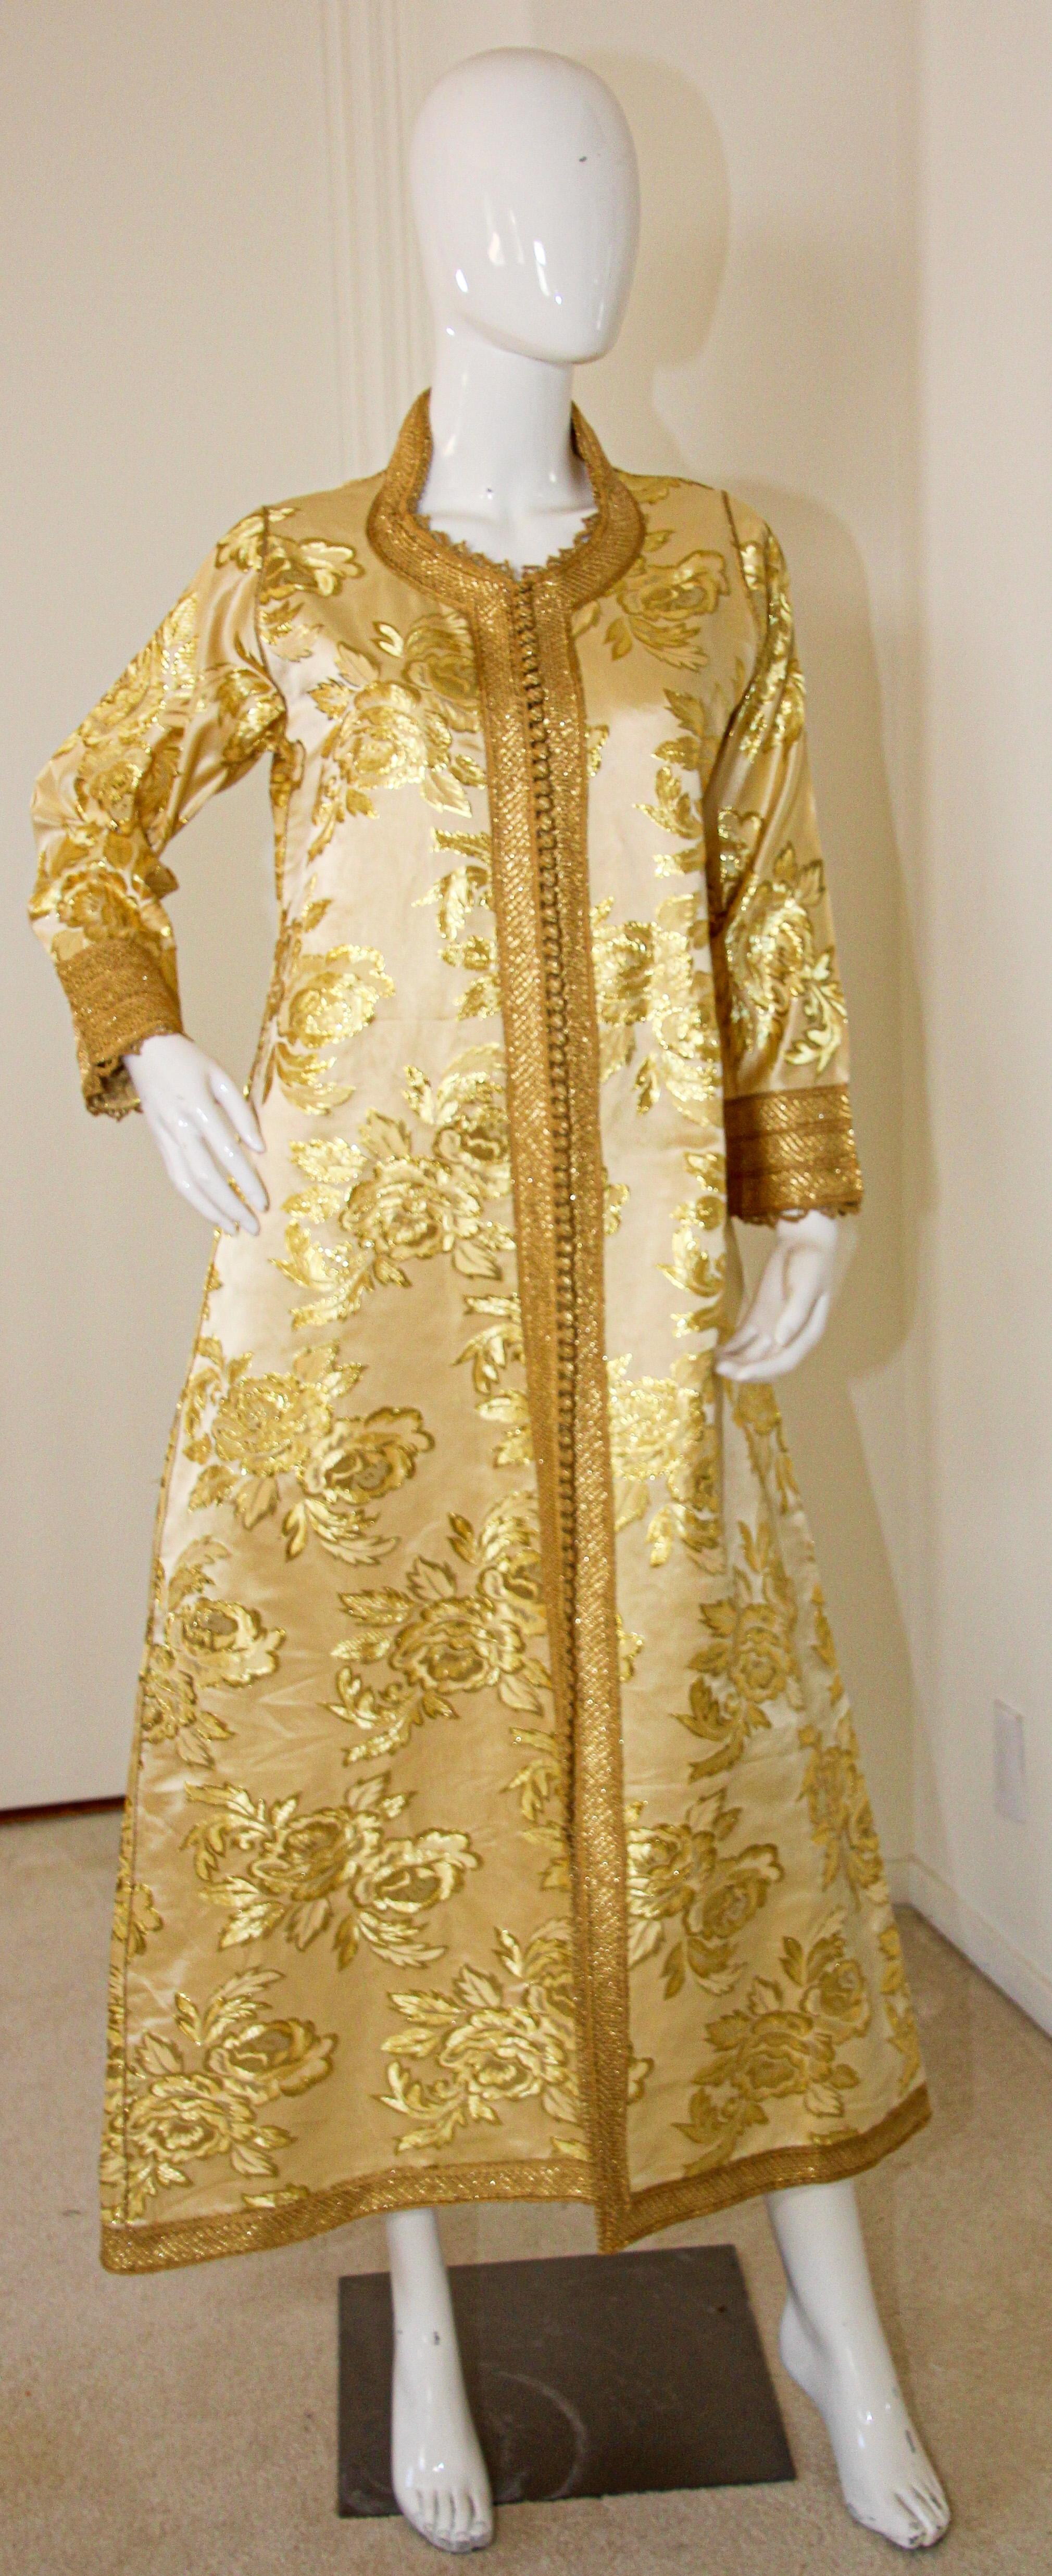 Amazing vintage Moroccan Caftan, gold silk damask gold threads trim, Circa 1960's
The light gold damask kaftan was entirely finish by hand.
One of a kind evening antique Moorish gown.
This authentic caftan has been hand-sewn from high end damask